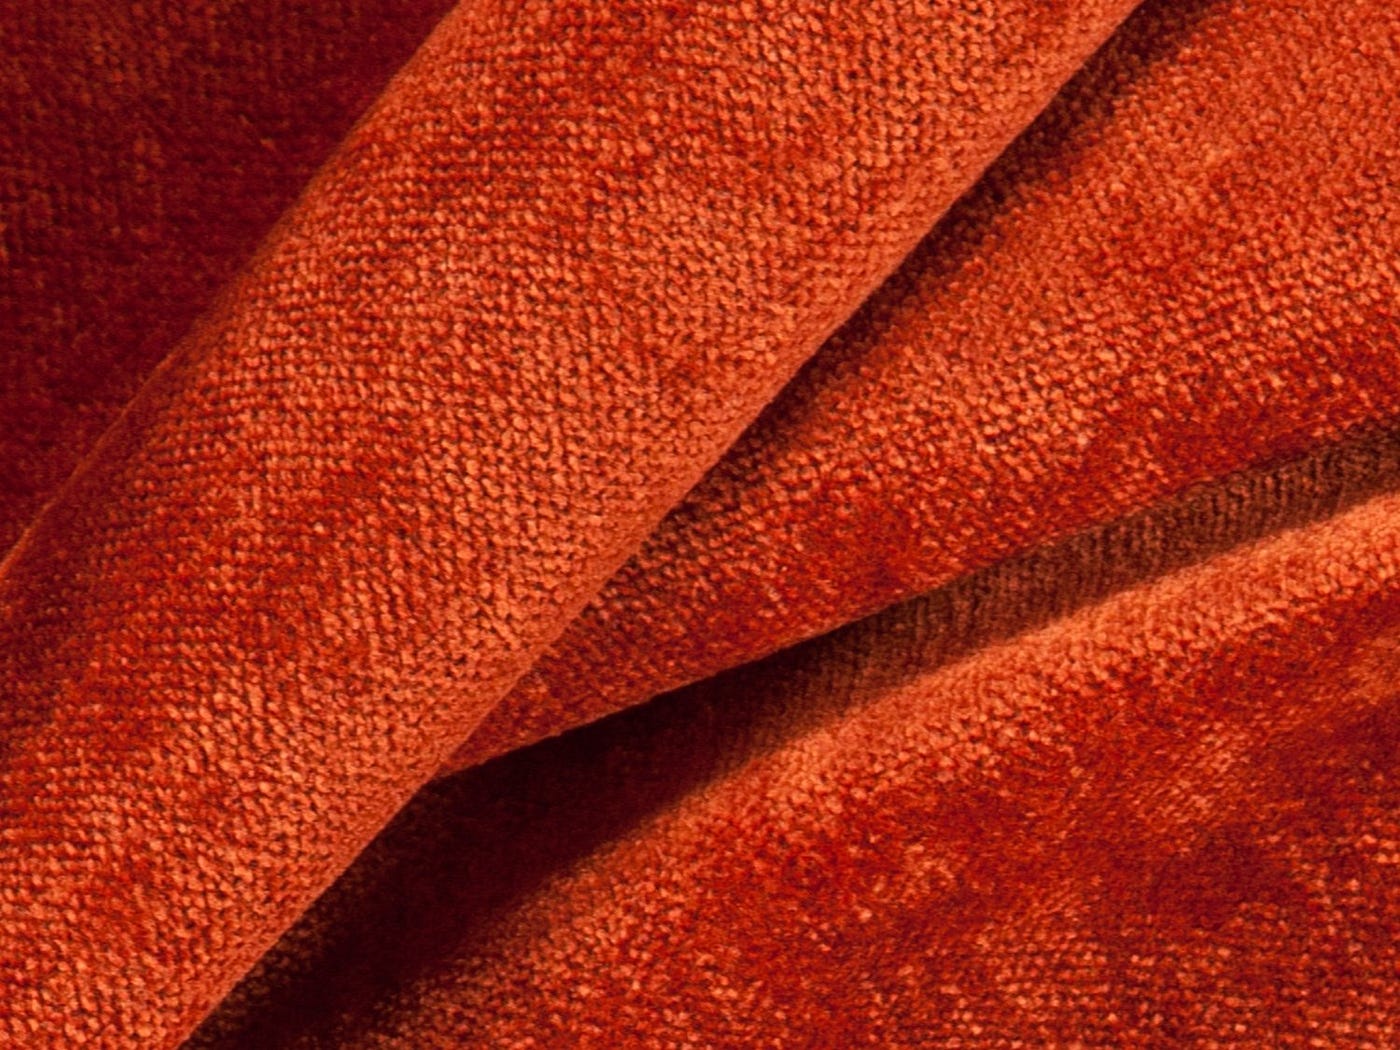 Why Is Chenille an Irresistible Upholstery Fabric?, by Maria Radici